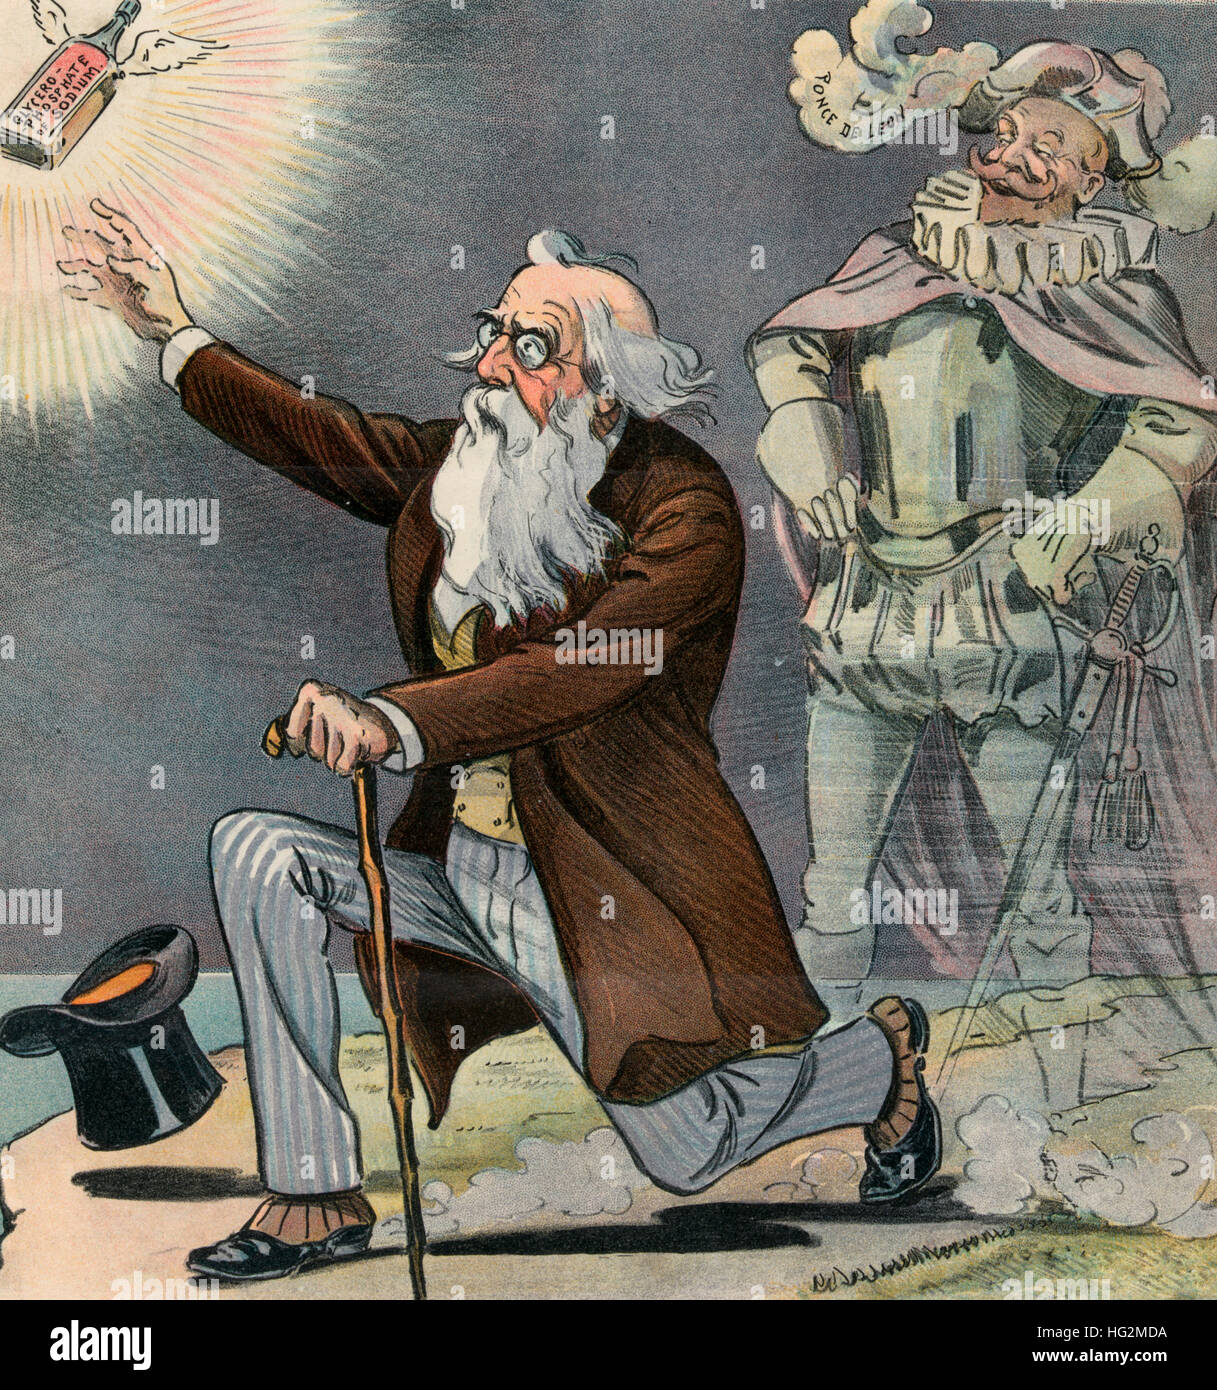 Fountain of Youth - The endless search -  Illustration shows an old man reaching for a bottle of 'Glycero-Phosphate of Sodium,' a patent medicine that apparently restores youthfulness to aged people. The spirit of Juan Ponce de León stands in the background, laughing. Stock Photo